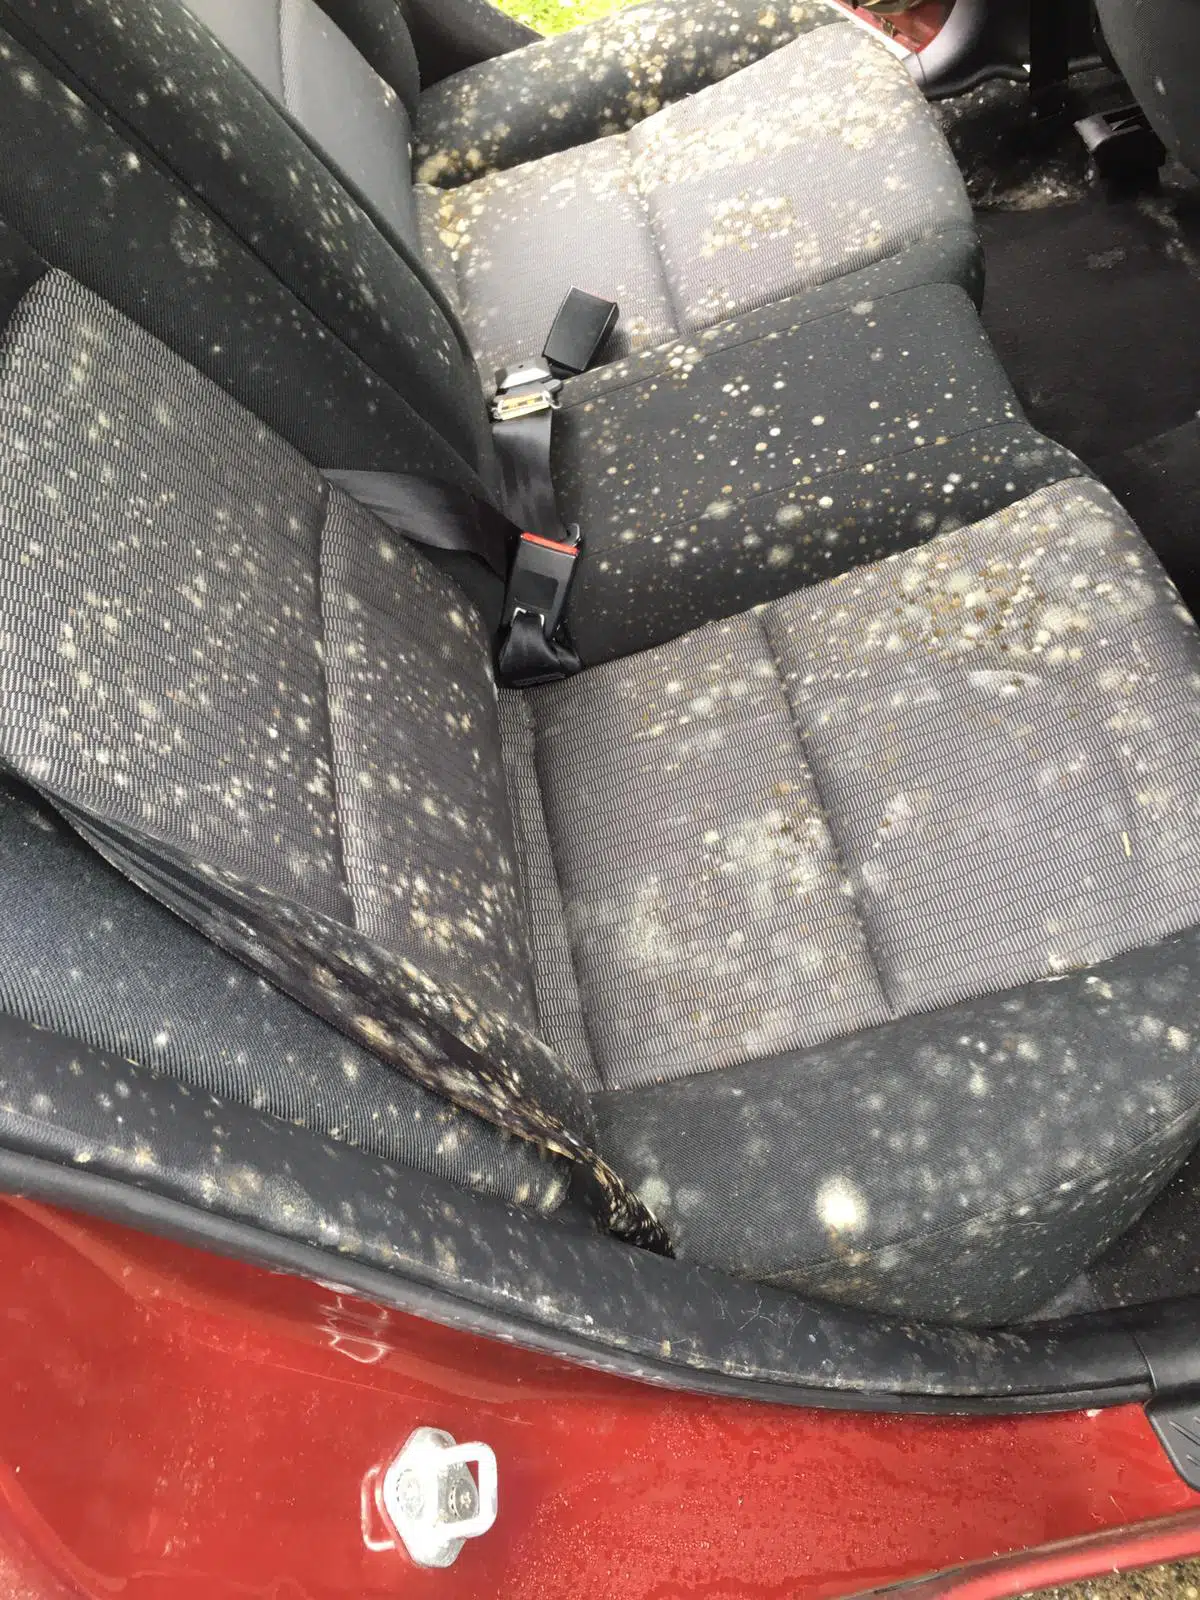 picture showing a car seat with mold before